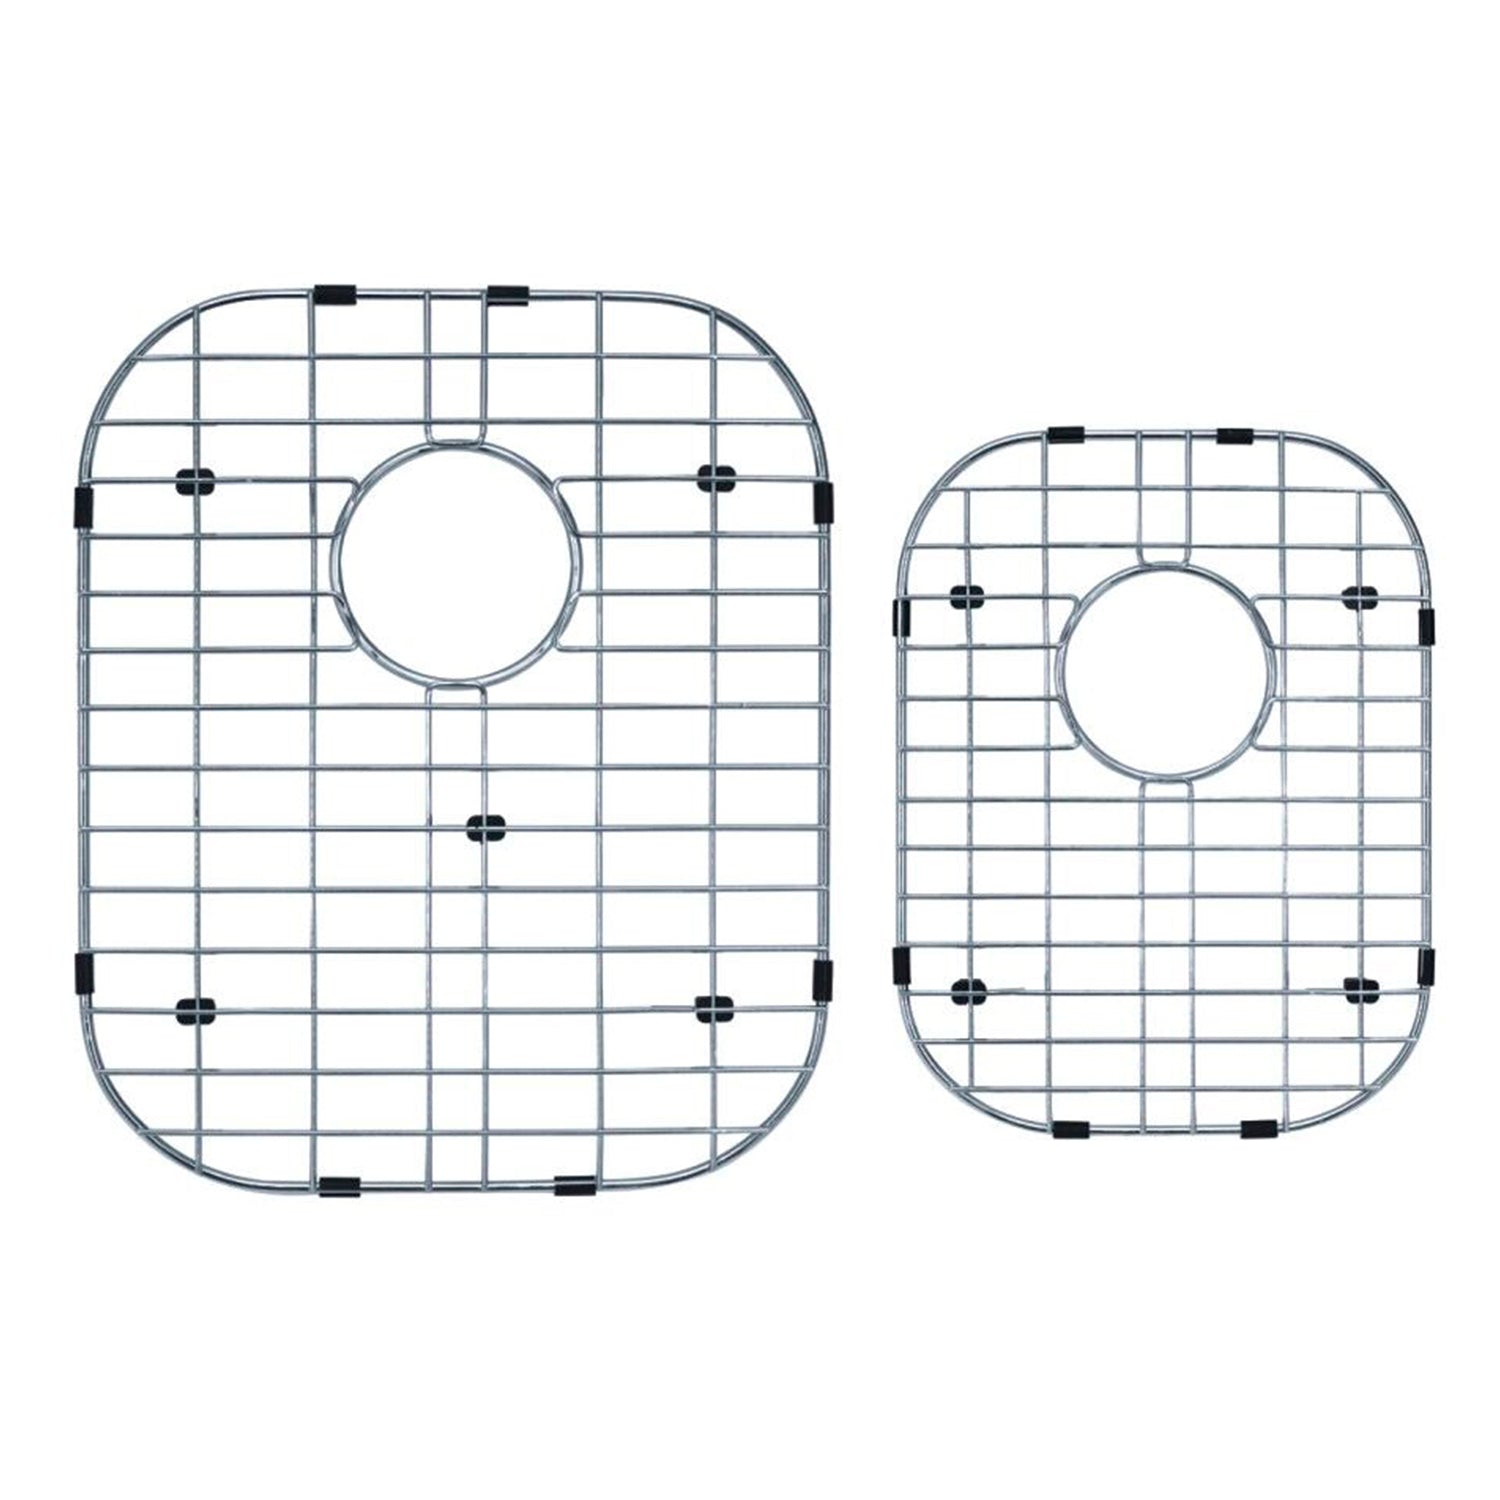 DAX Grid for Kitchen Sink, Stainless Steel Body, Chrome Finish, Compatible with DAX-3120L - DAX-3120R, (GRID-3120L-R)